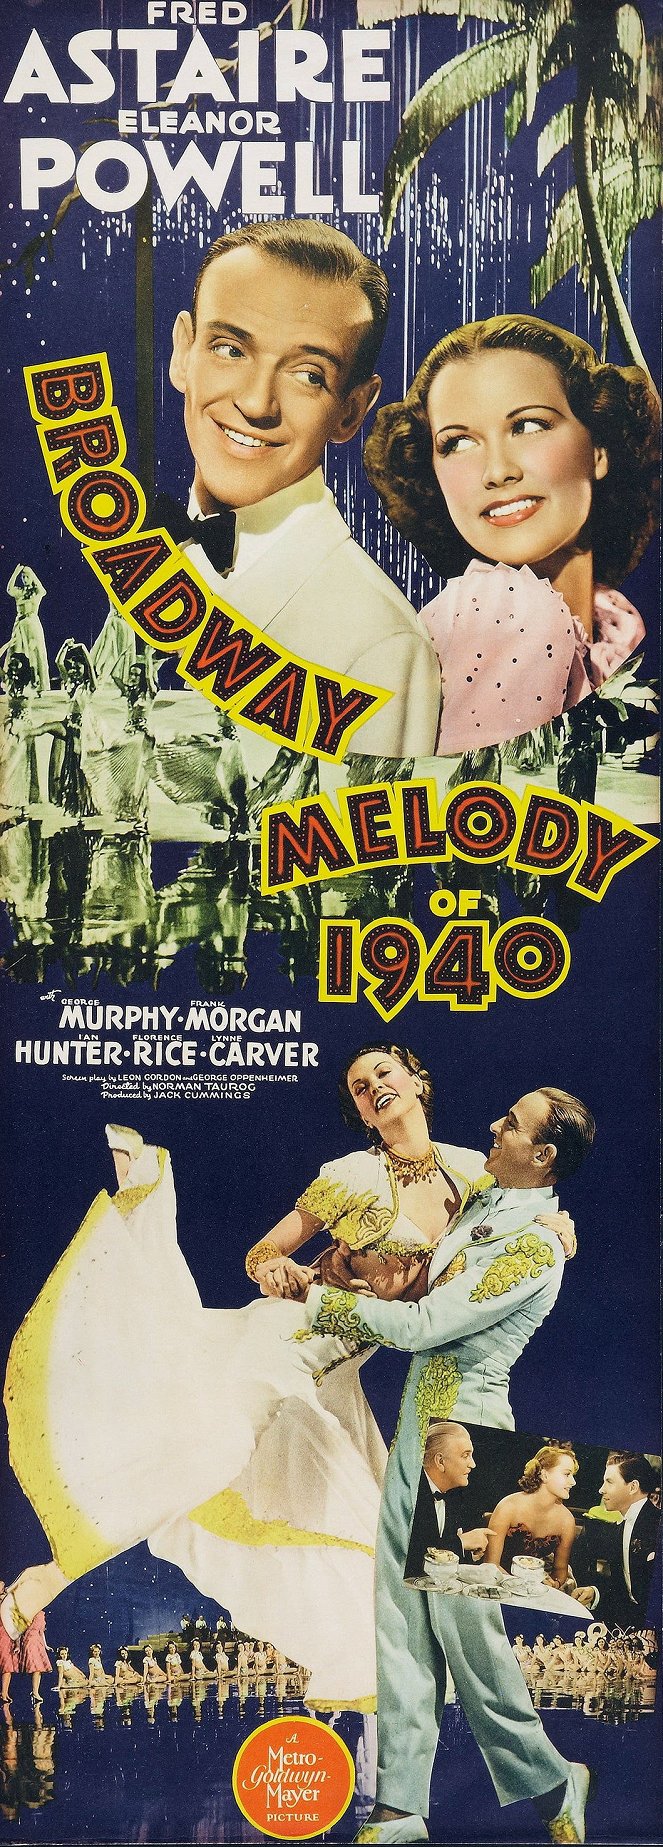 Broadway Melody of 1940 - Posters